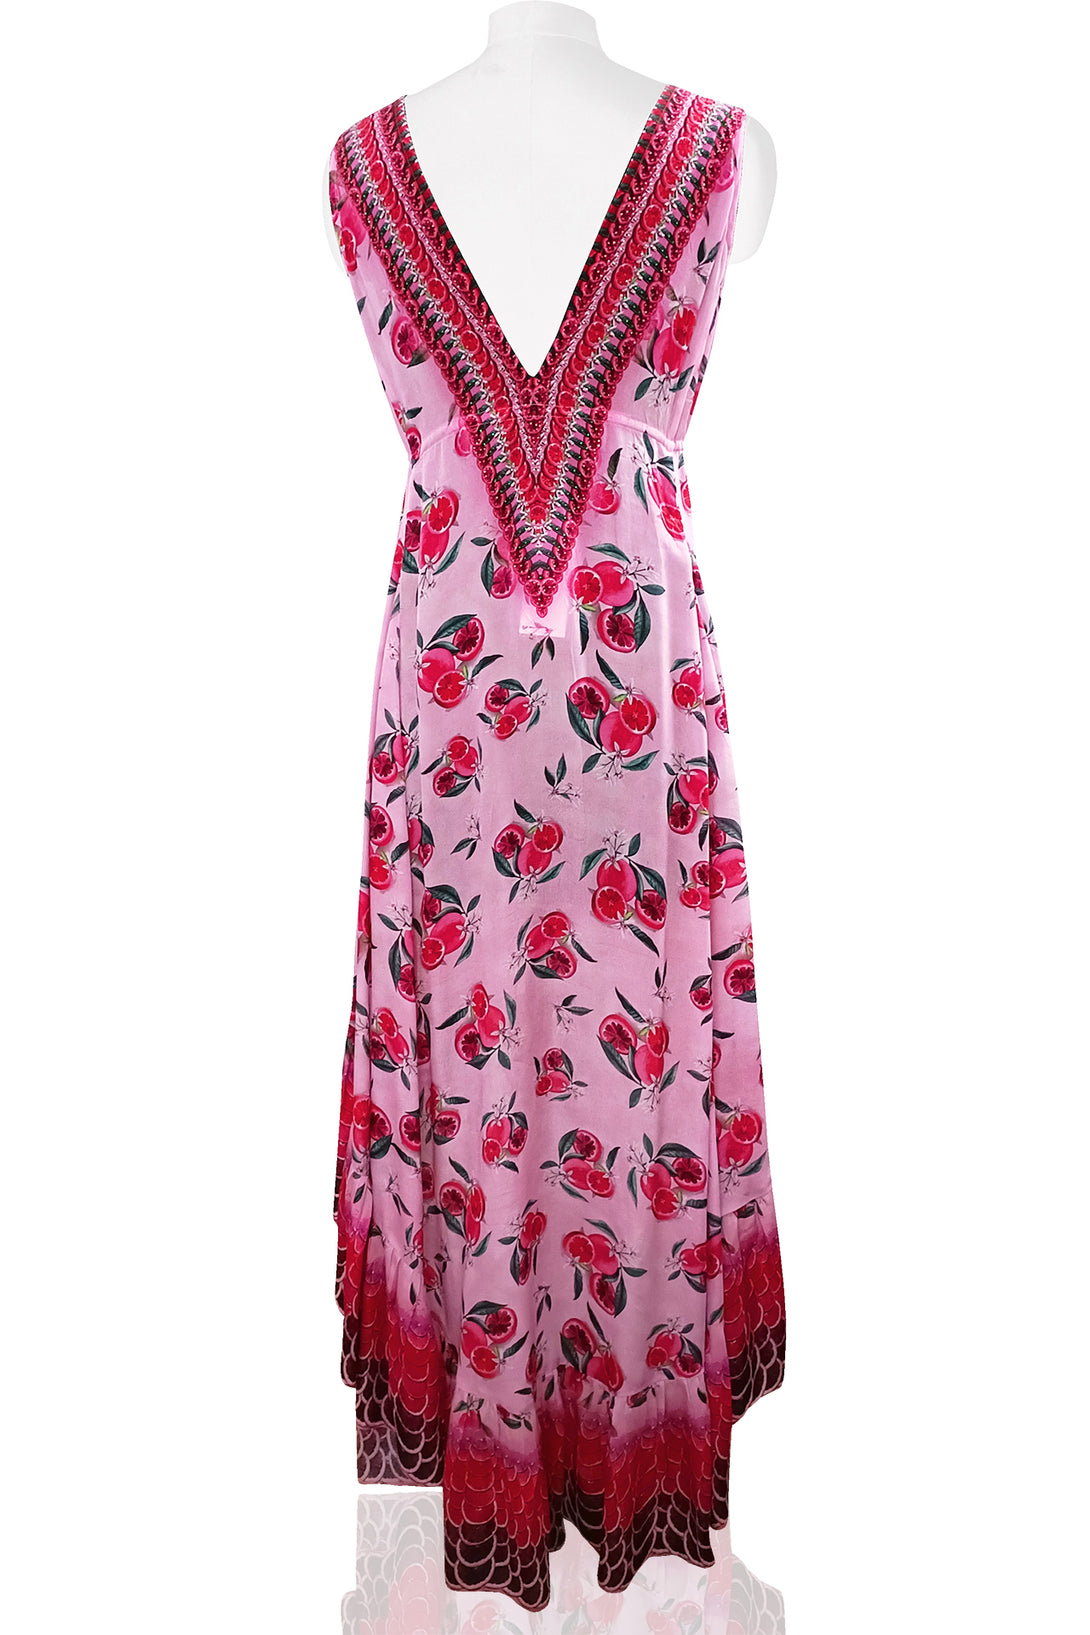  pink womens maxi dress, high and low cocktail dresses, plunging v neck formal dress, Shahida Parides,